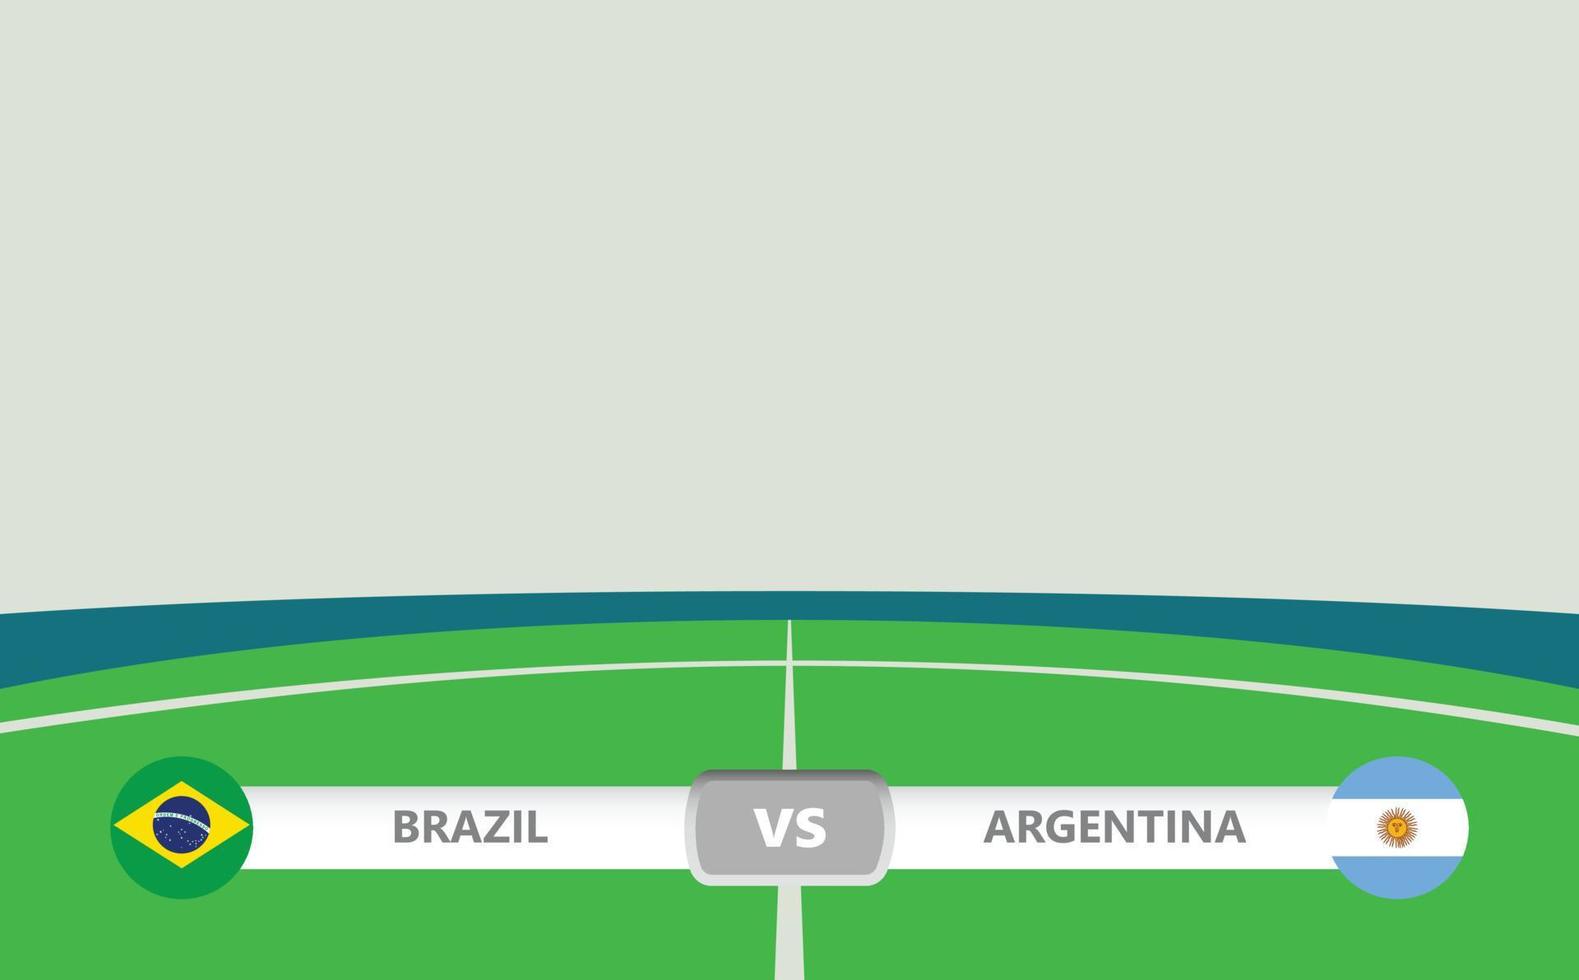 Vector match preview with lower third label within football stadium background. Brazil vs Argentina.